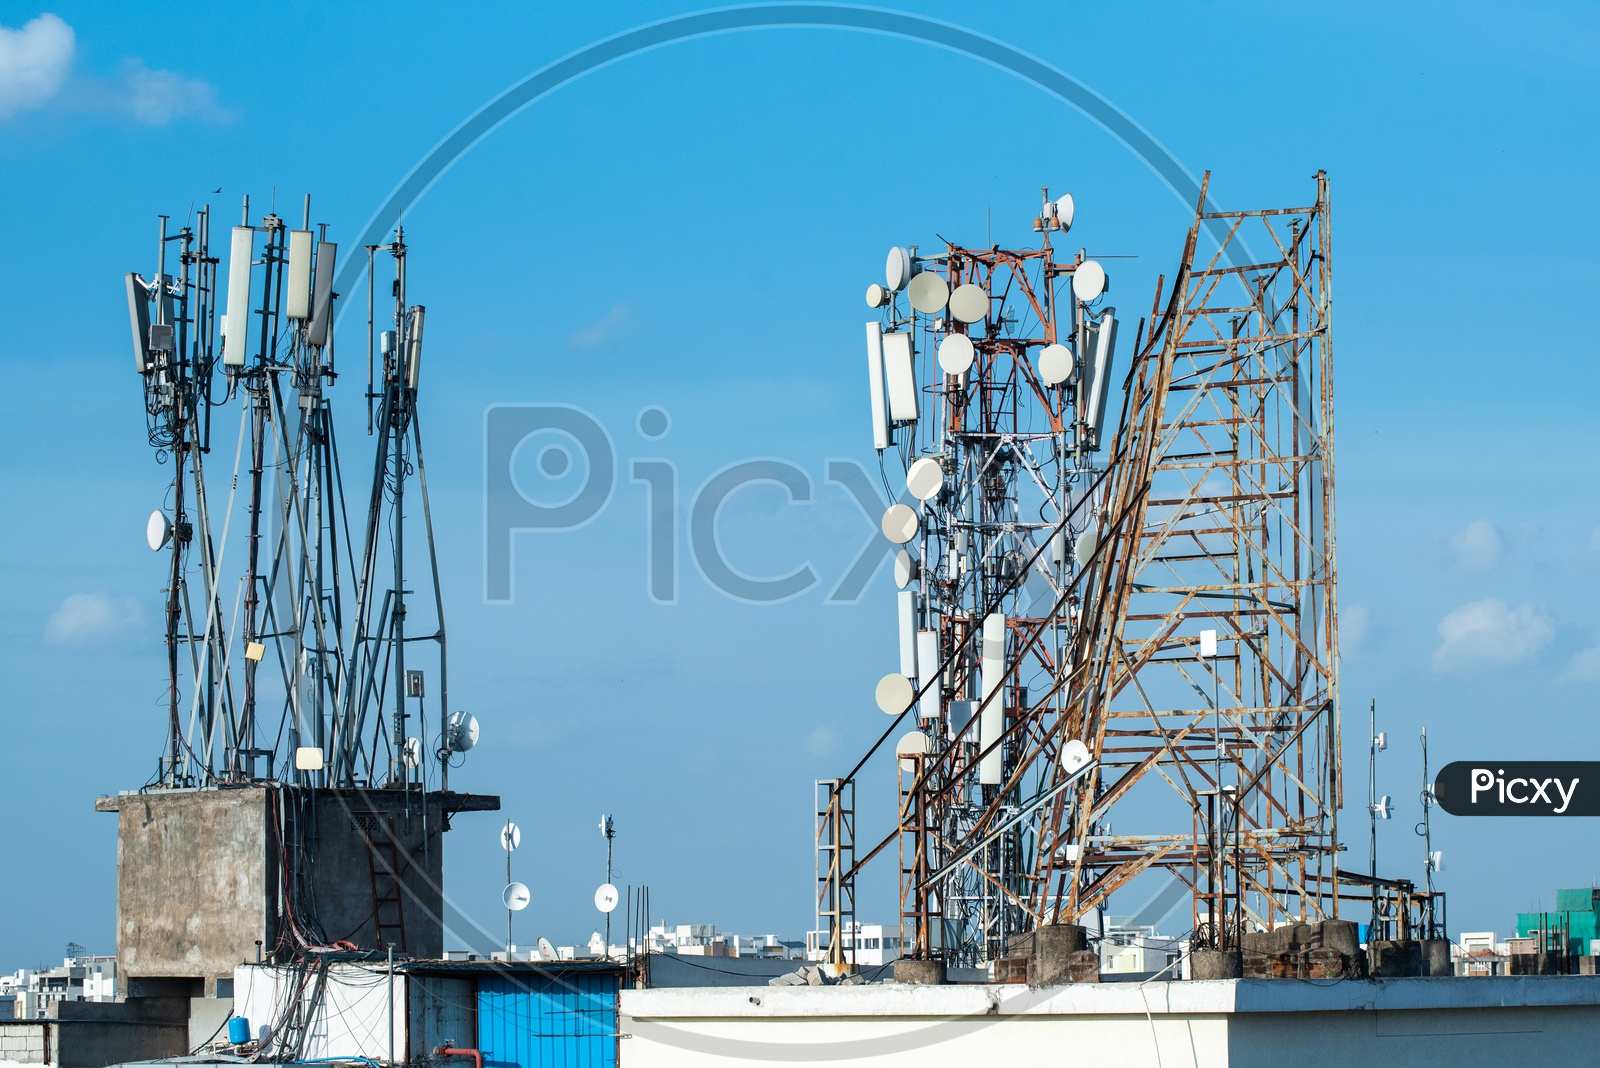 Cellular network Towers On Building Tops